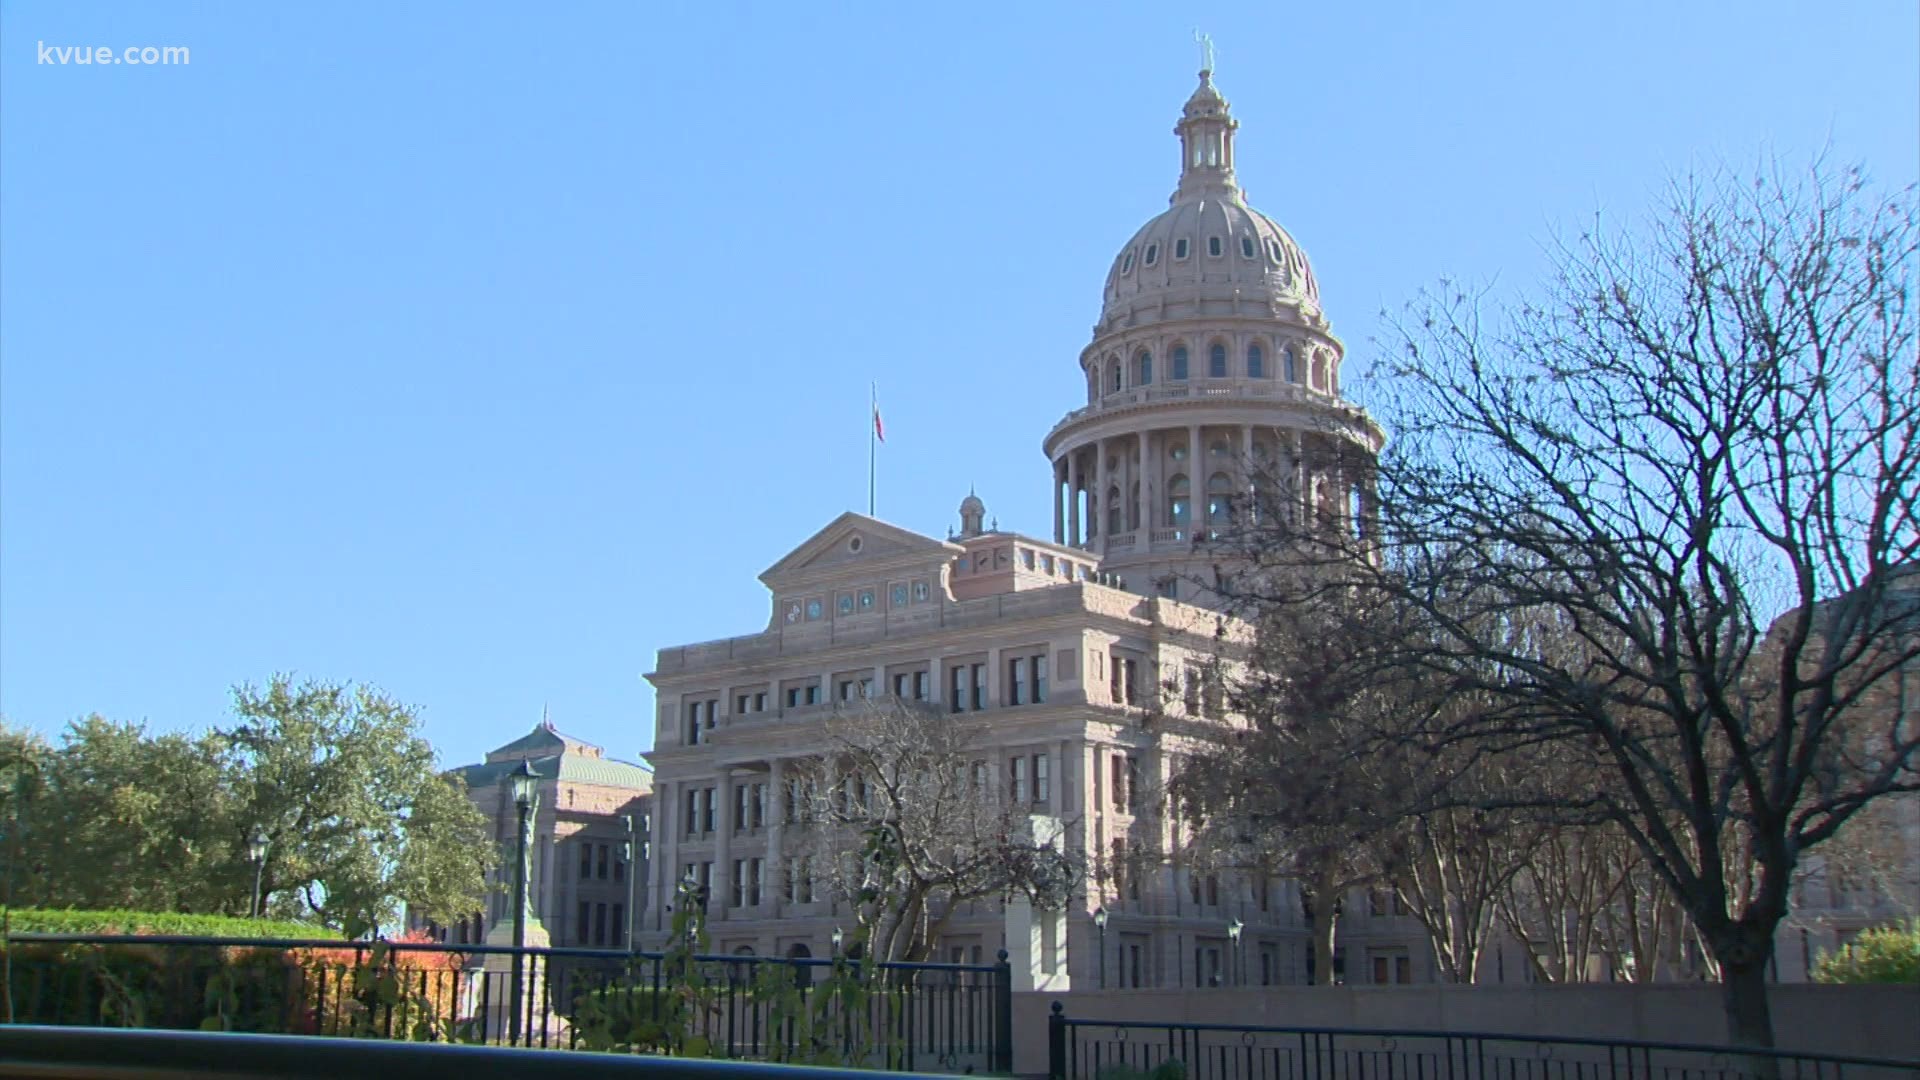 Visitors to the Texas Capitol were allowed on the grounds and inside the building on Monday for the first time in months.